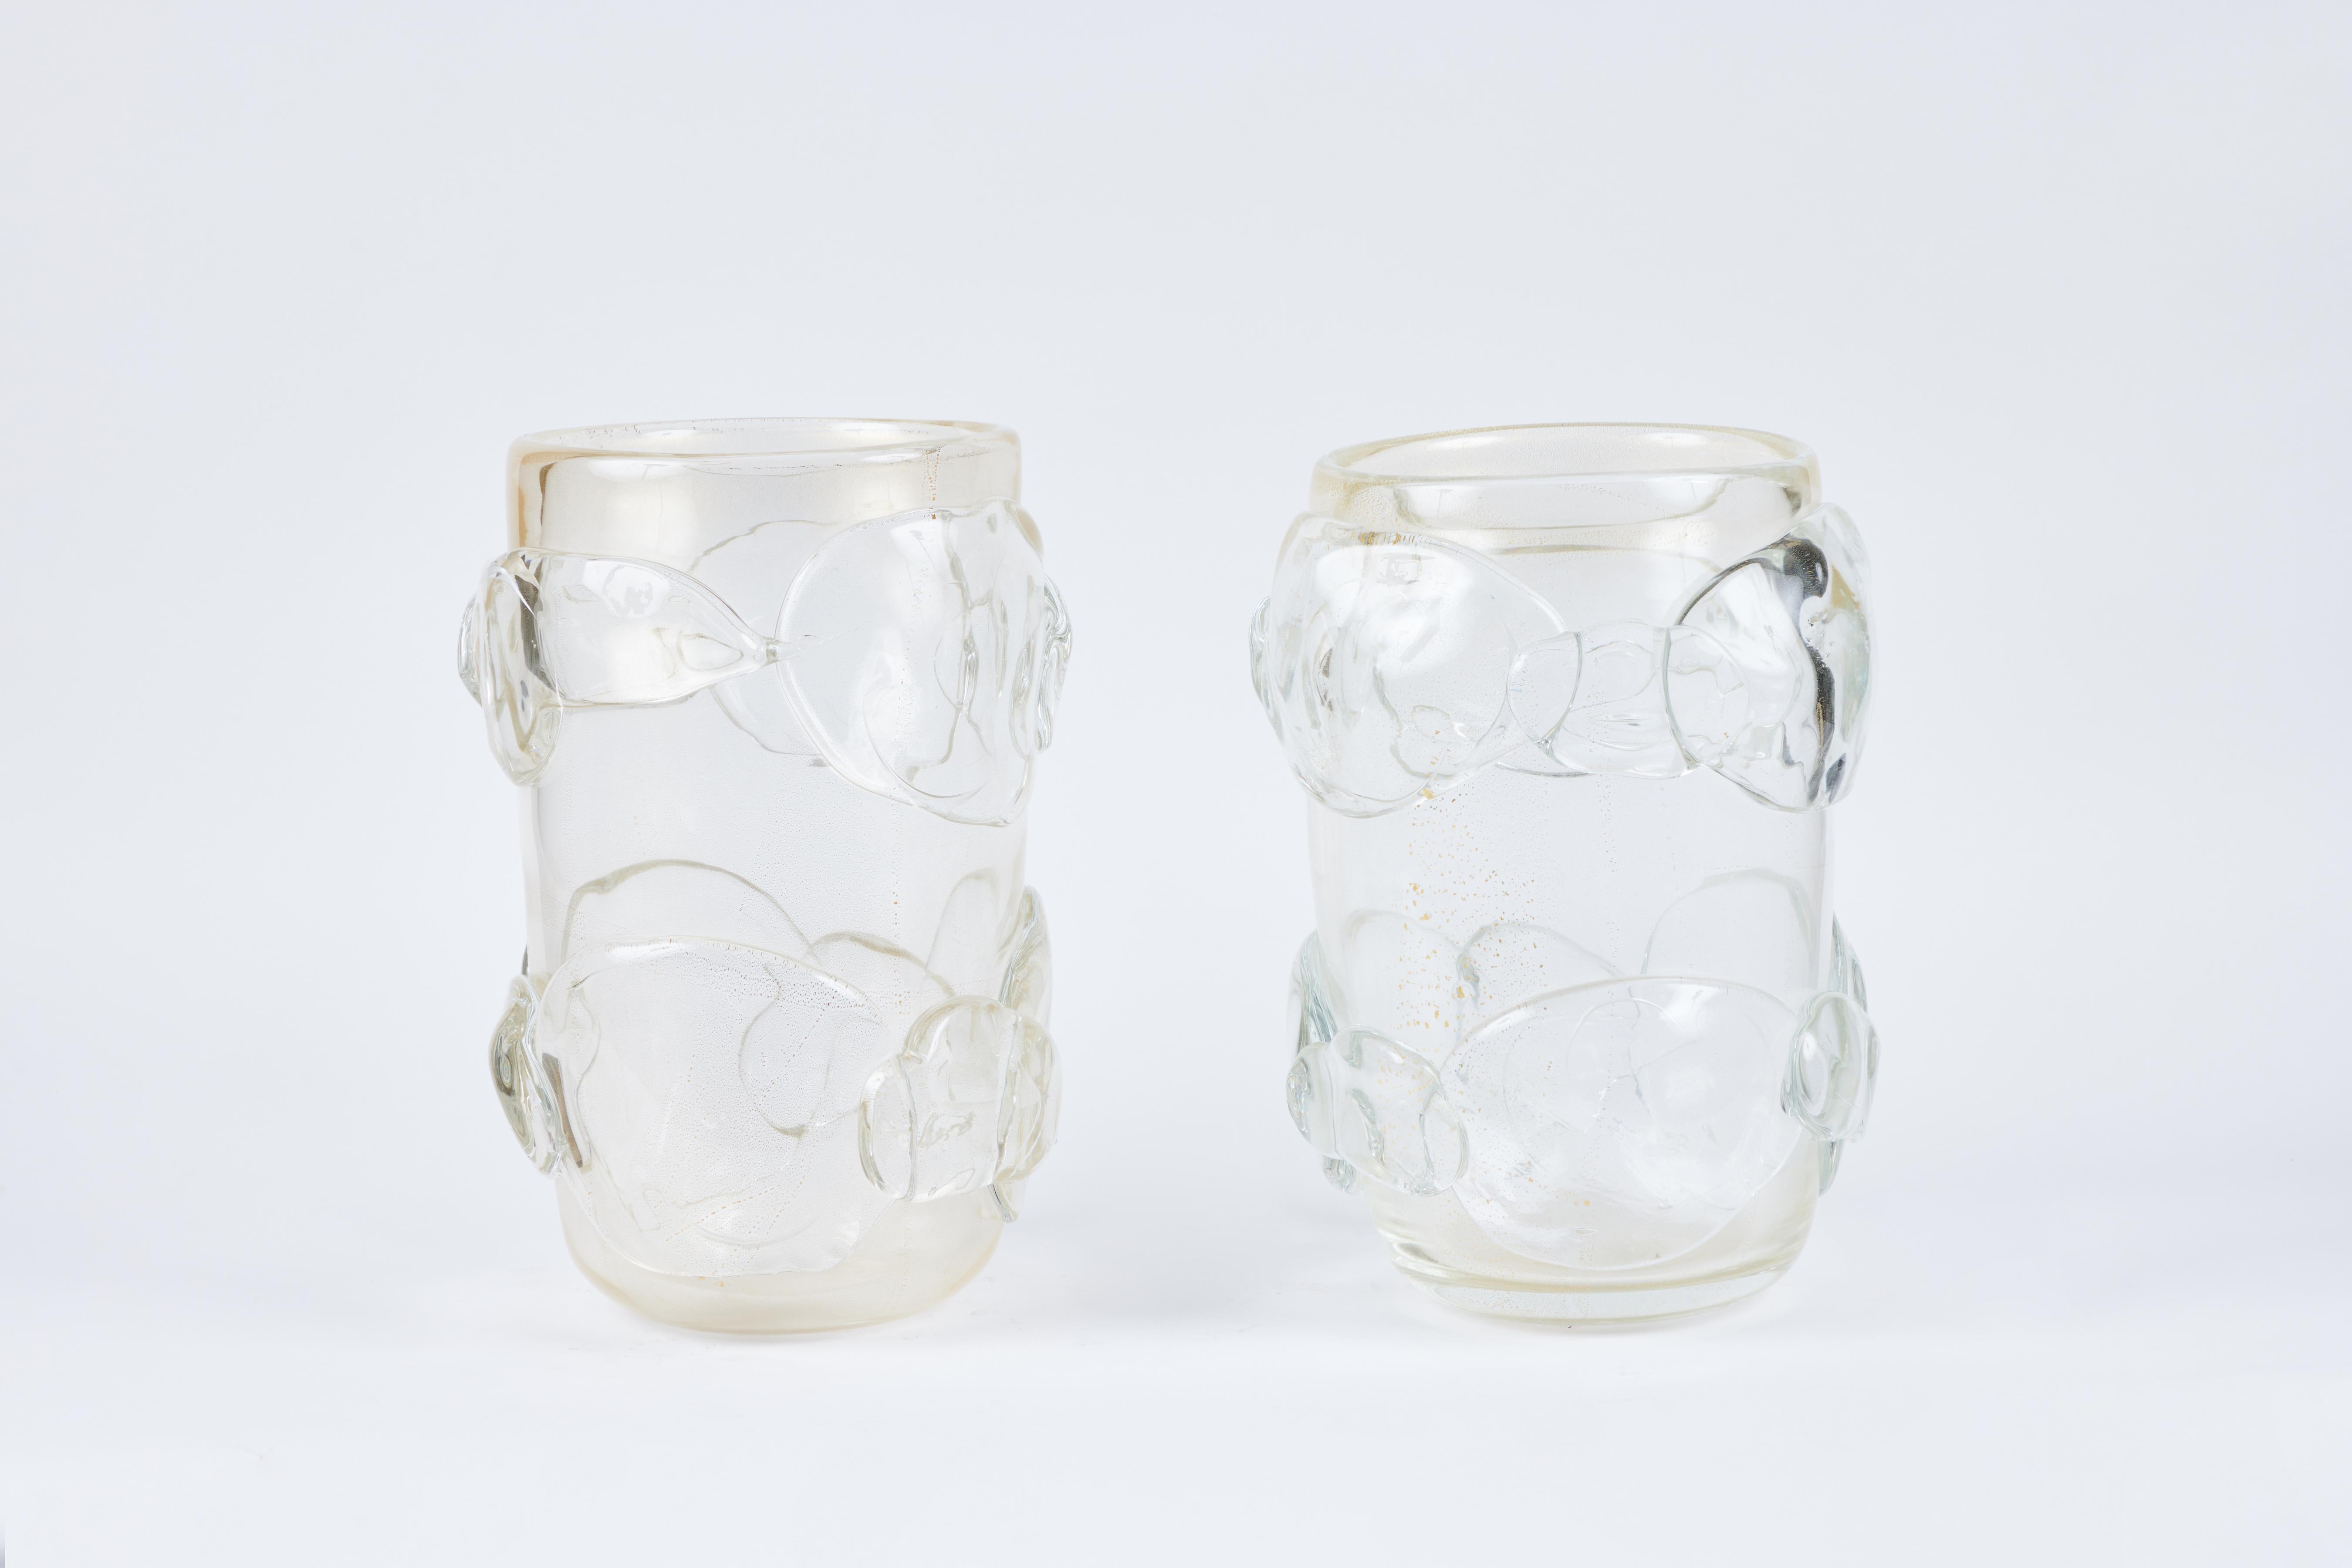 A pair of striking hand-blown glass flecked with 22 karat gold Murano vases. Can be sold separately.